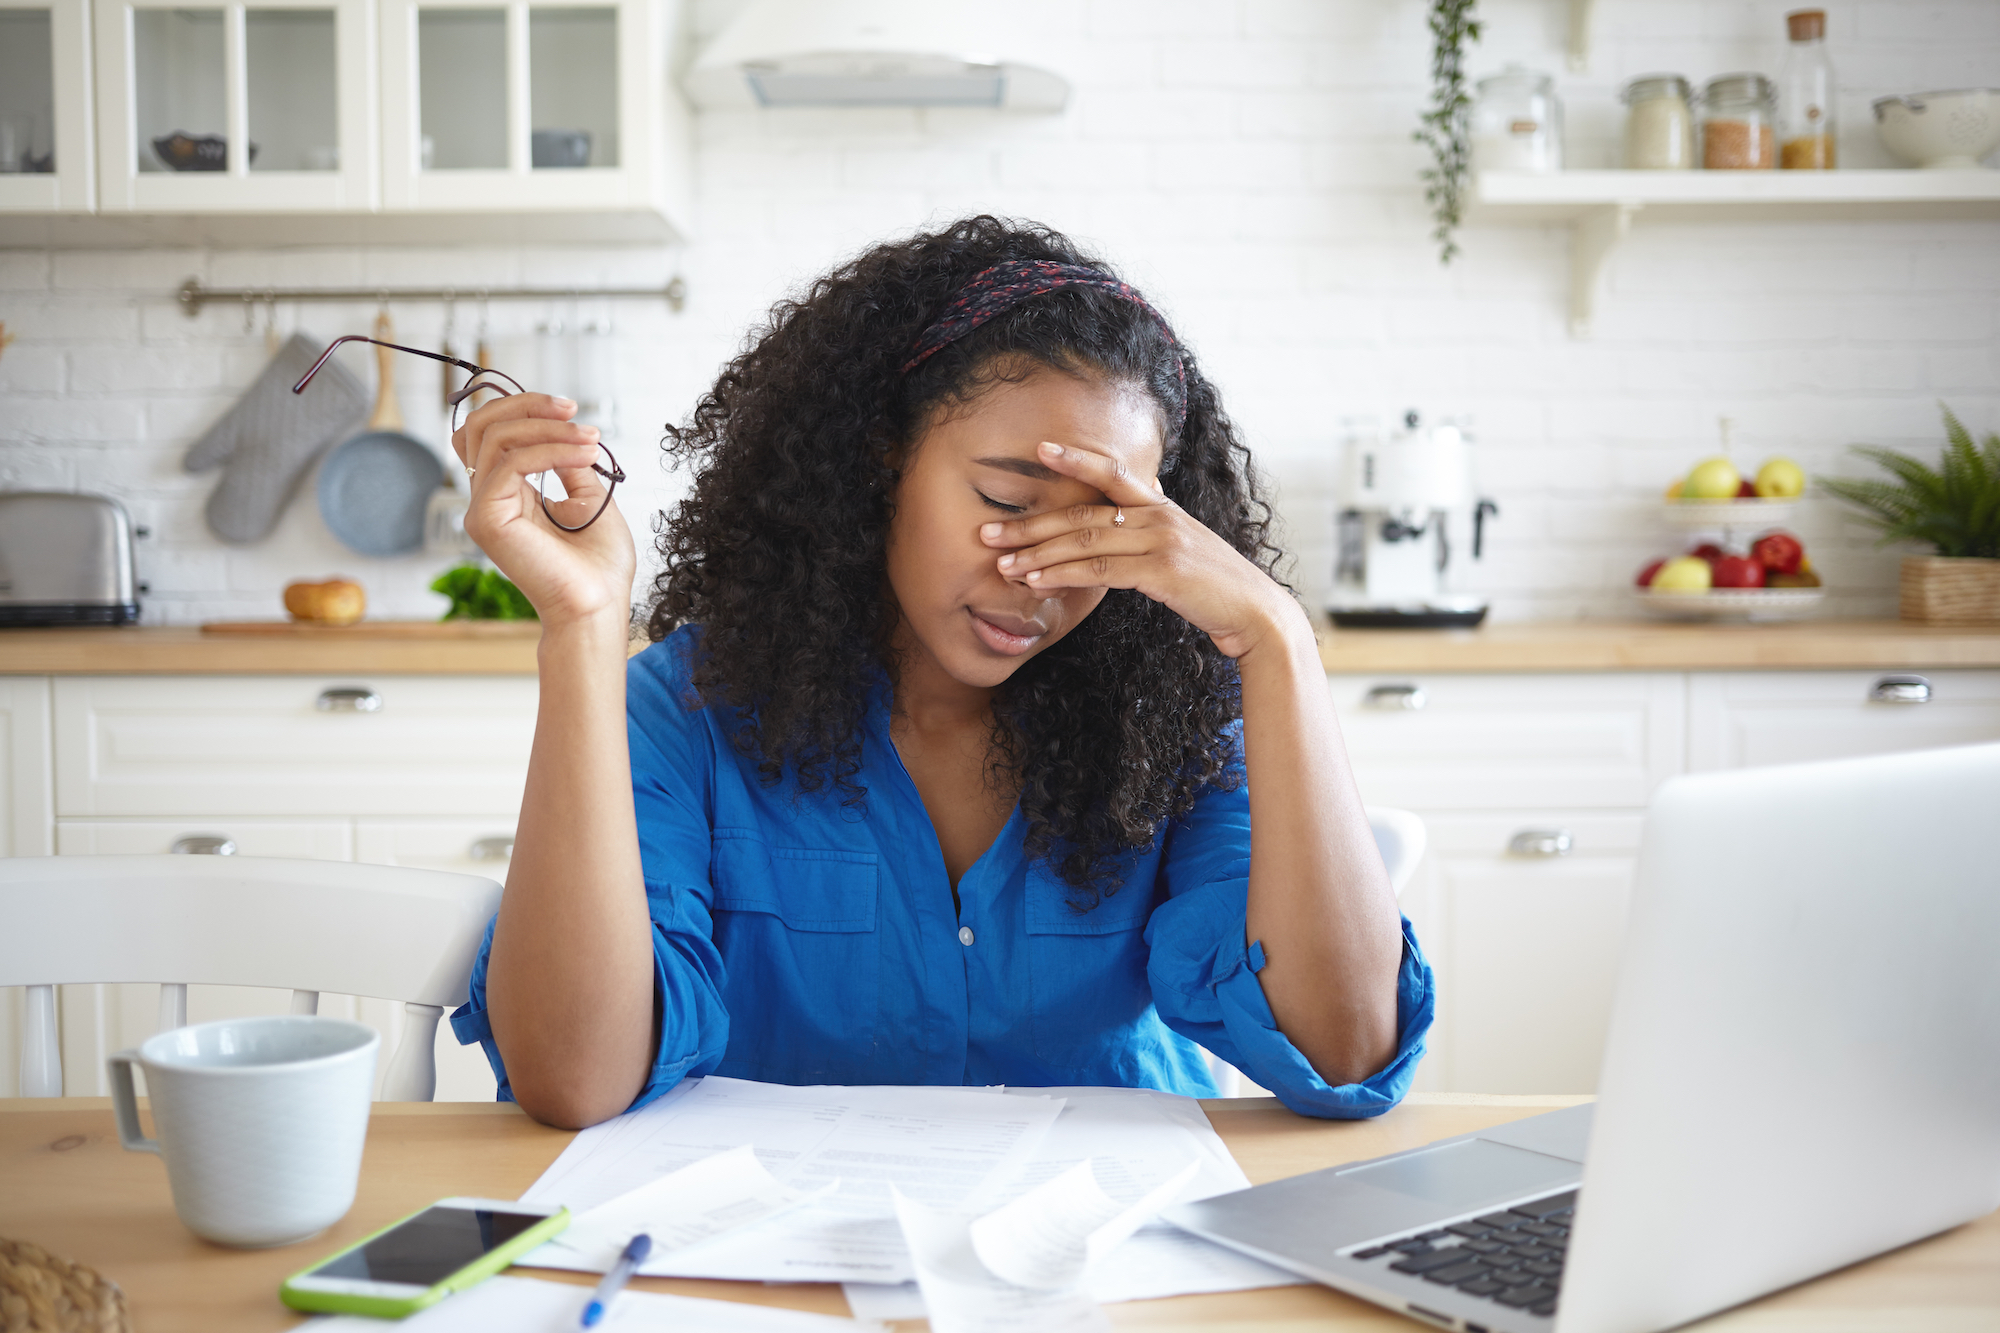 Black woman in a blue button down shirt looks stressed with her left hand on her temple and glasses in her right and sitting in her kitchen